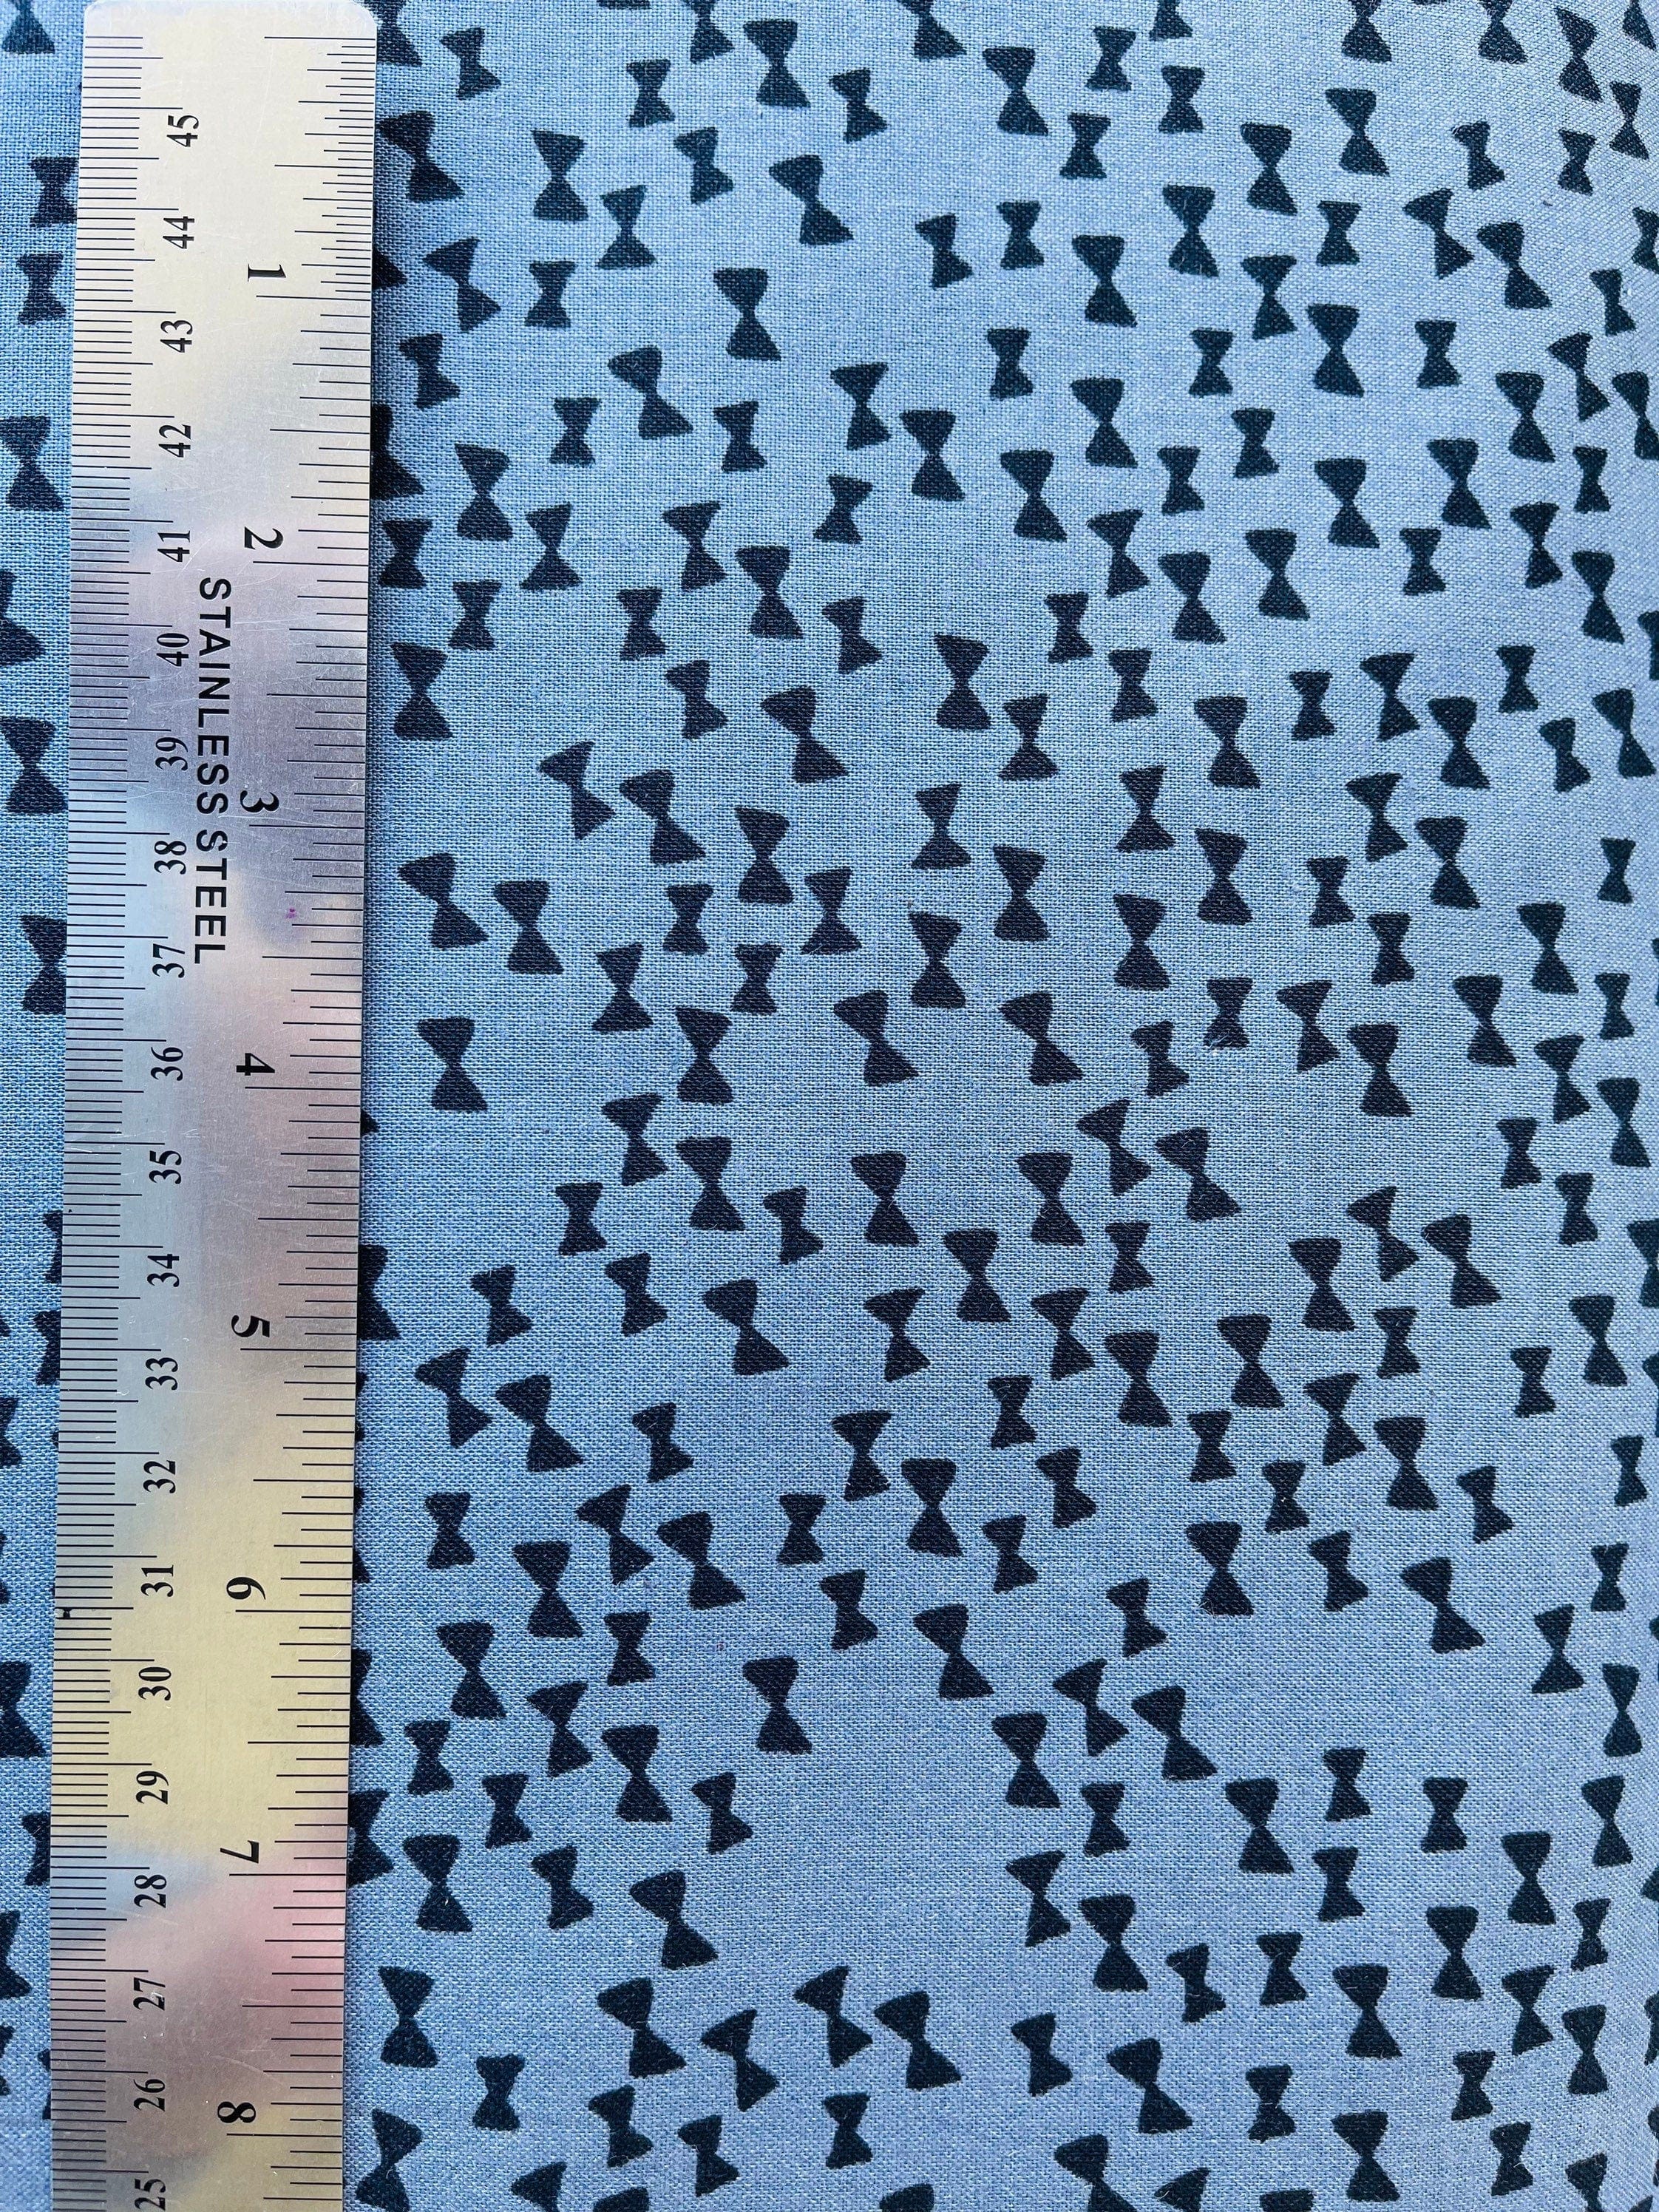 Flower Shop - Bow Ties - Night Unbleached Cotton - Cotton + Steel - Quilting Cotton Fabric - A4045-003